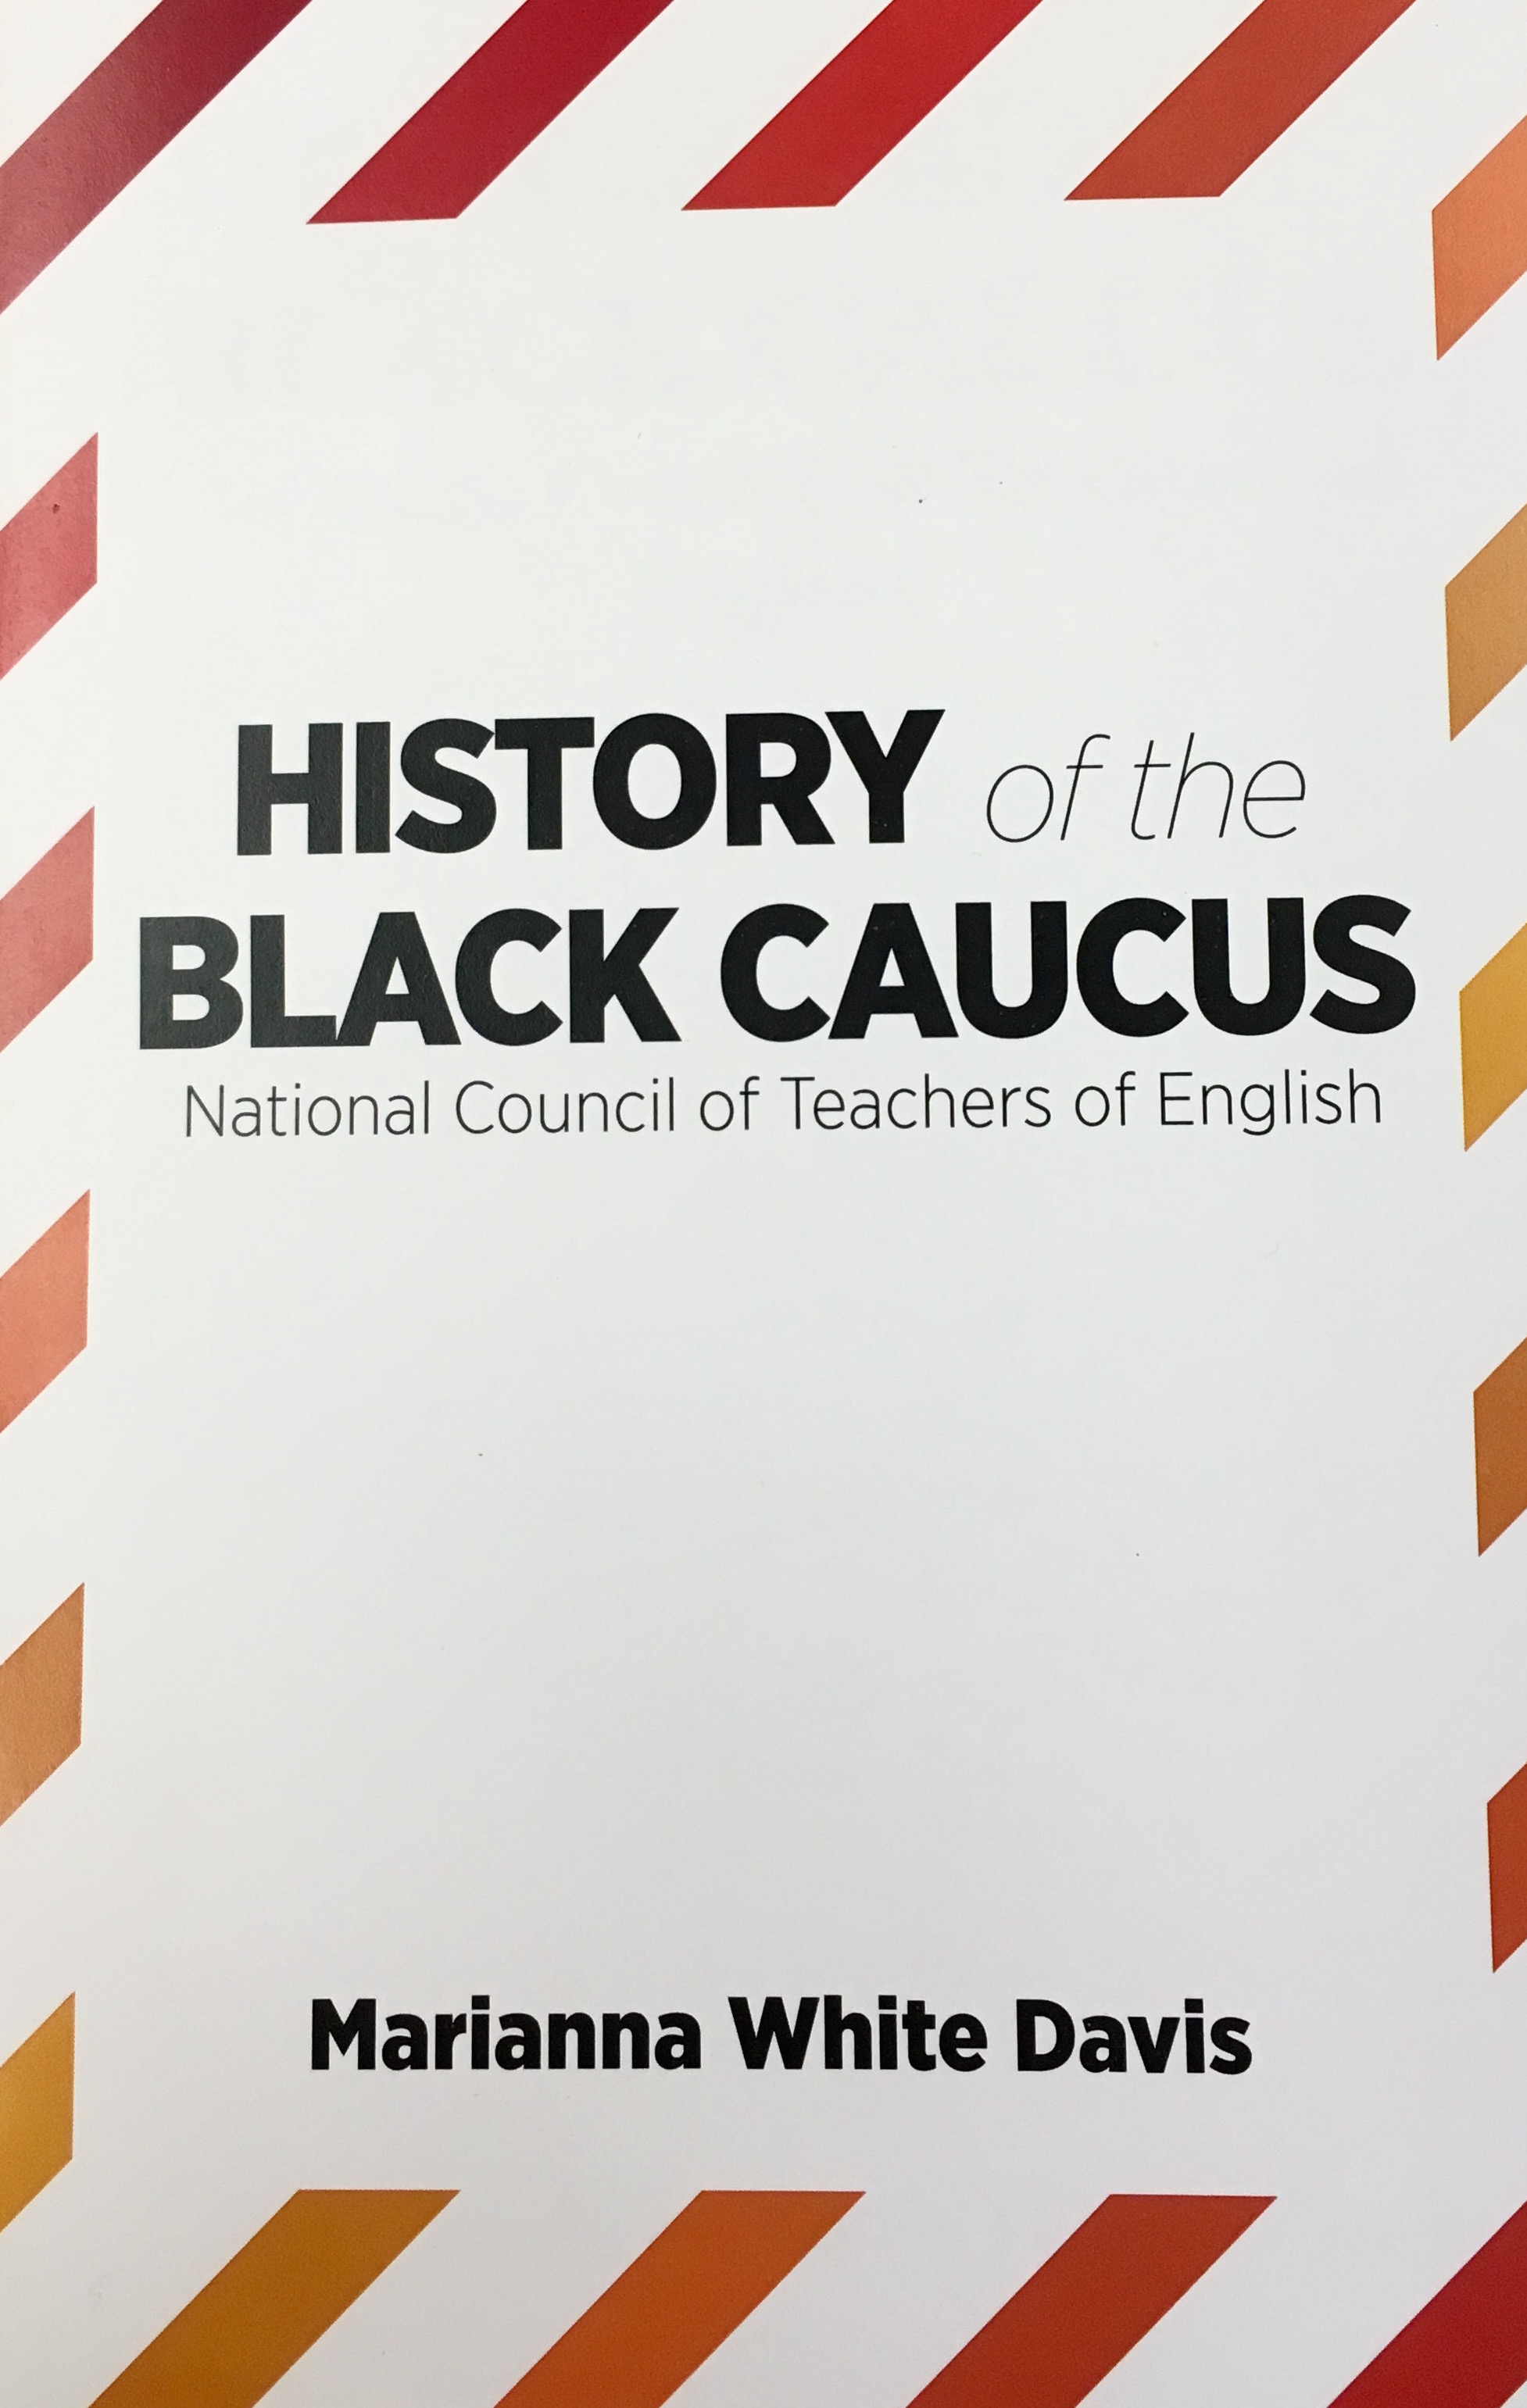 History of the Black Caucus